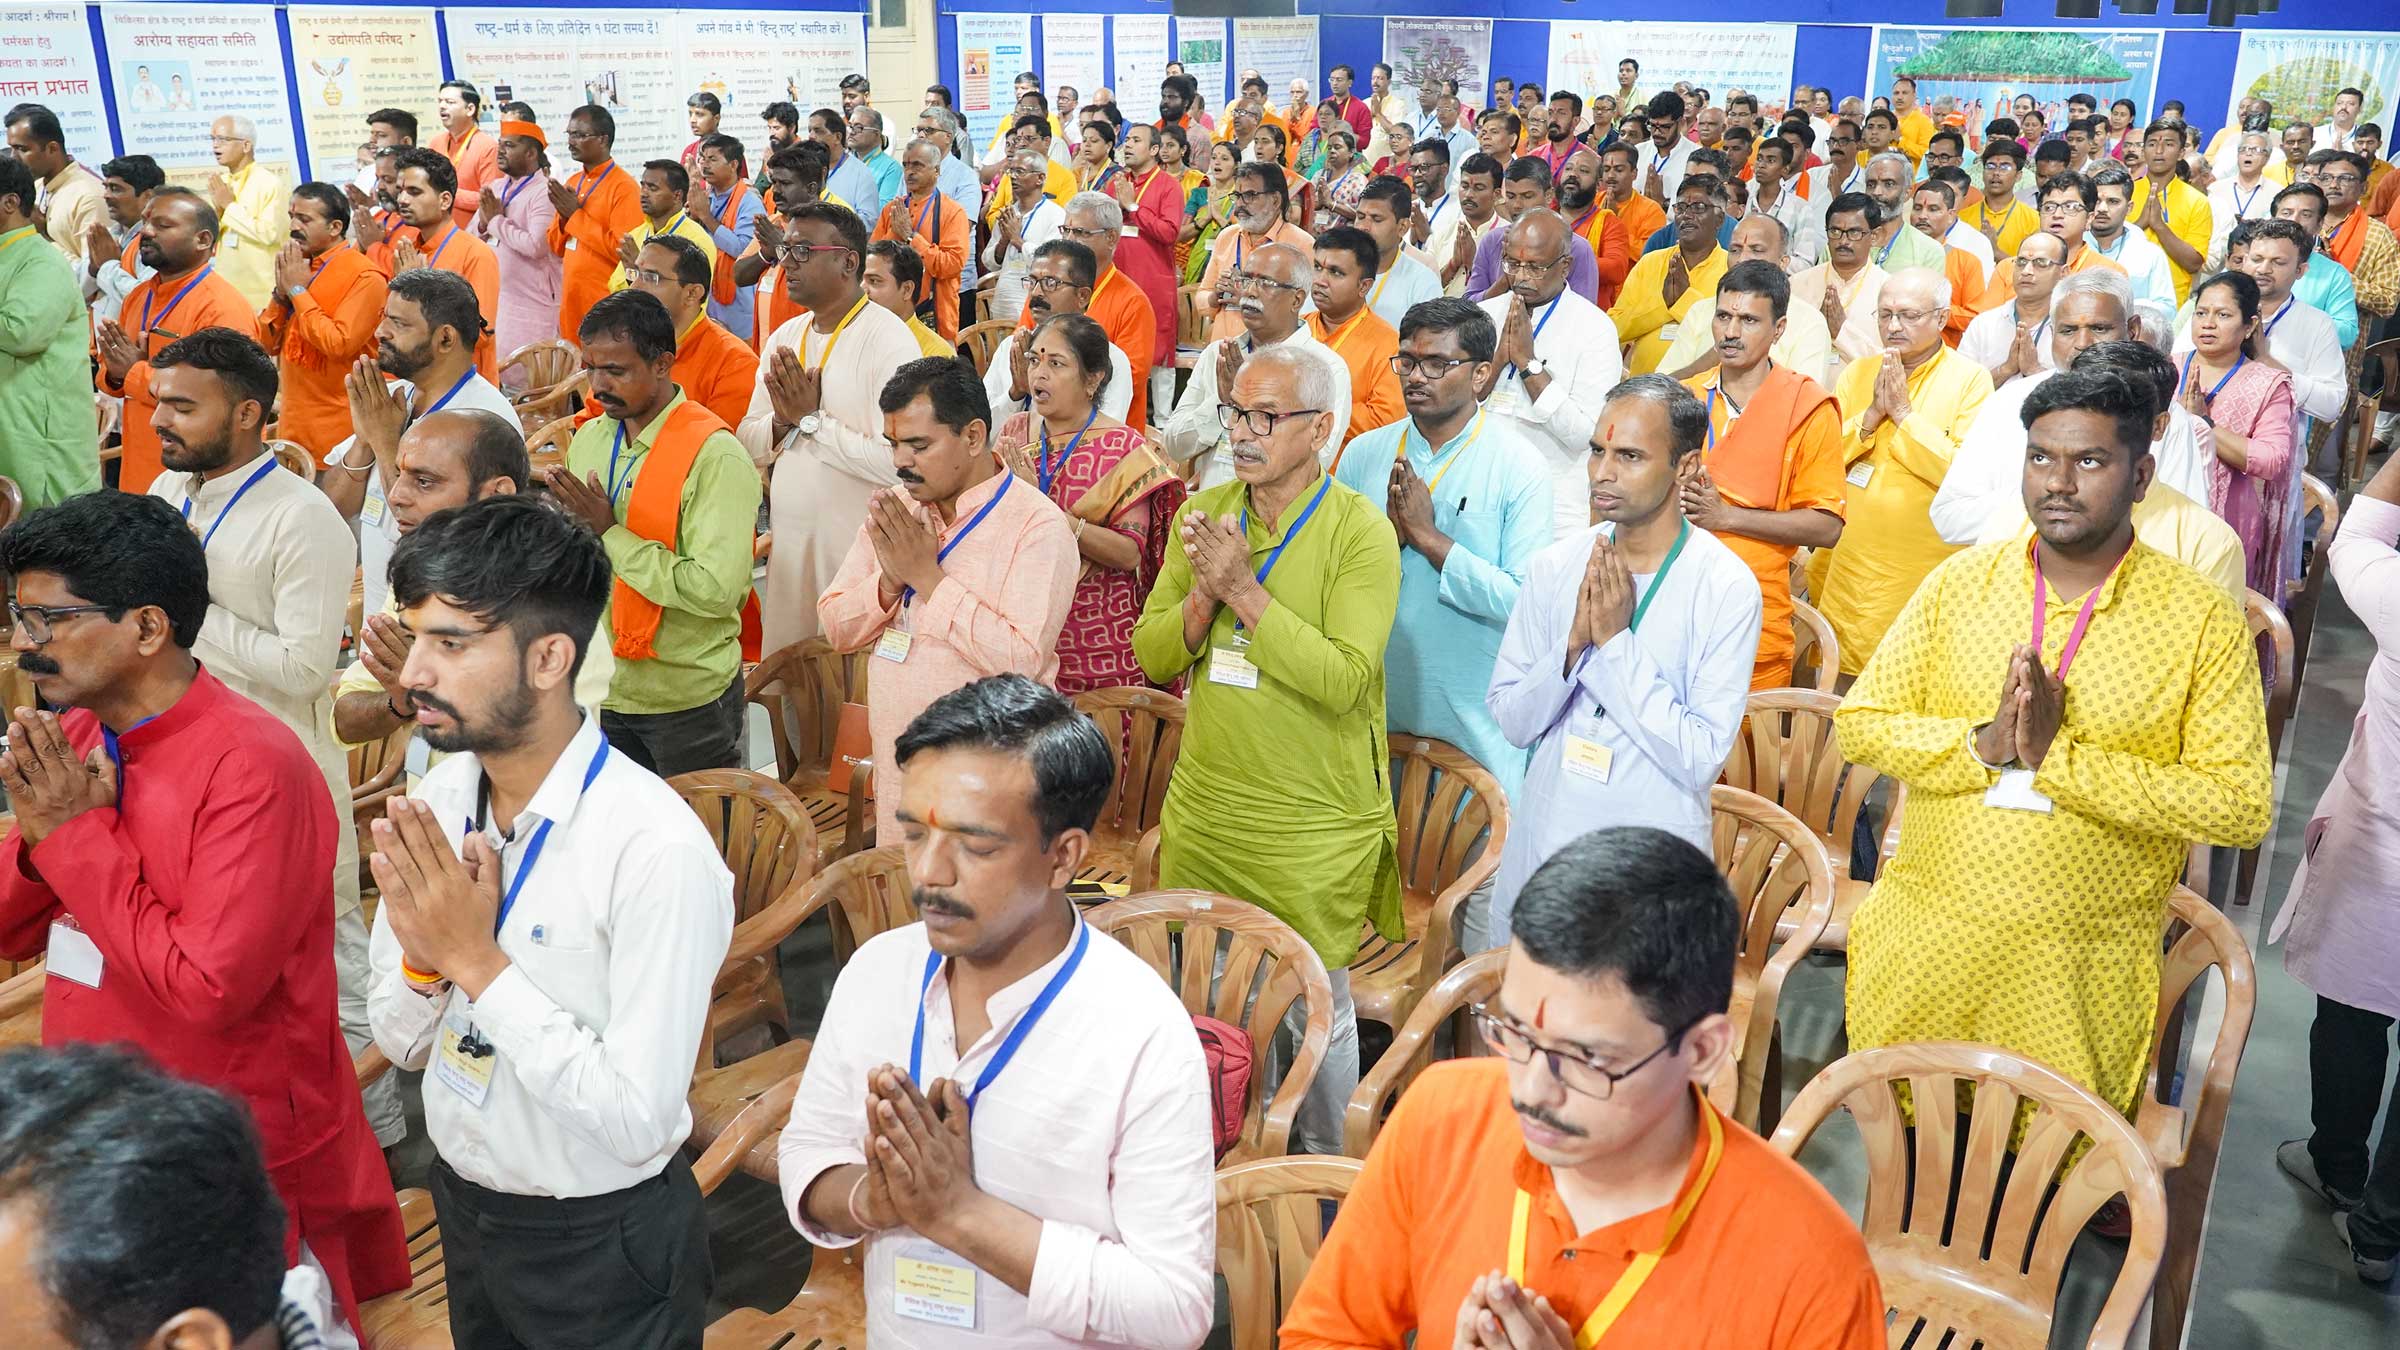 Devout Hindus who participated in the ‘Vaishvik Hindu Rashtra Mahotsav’ listening to the ‘Vande Mataram’ with equal passion for the Nation